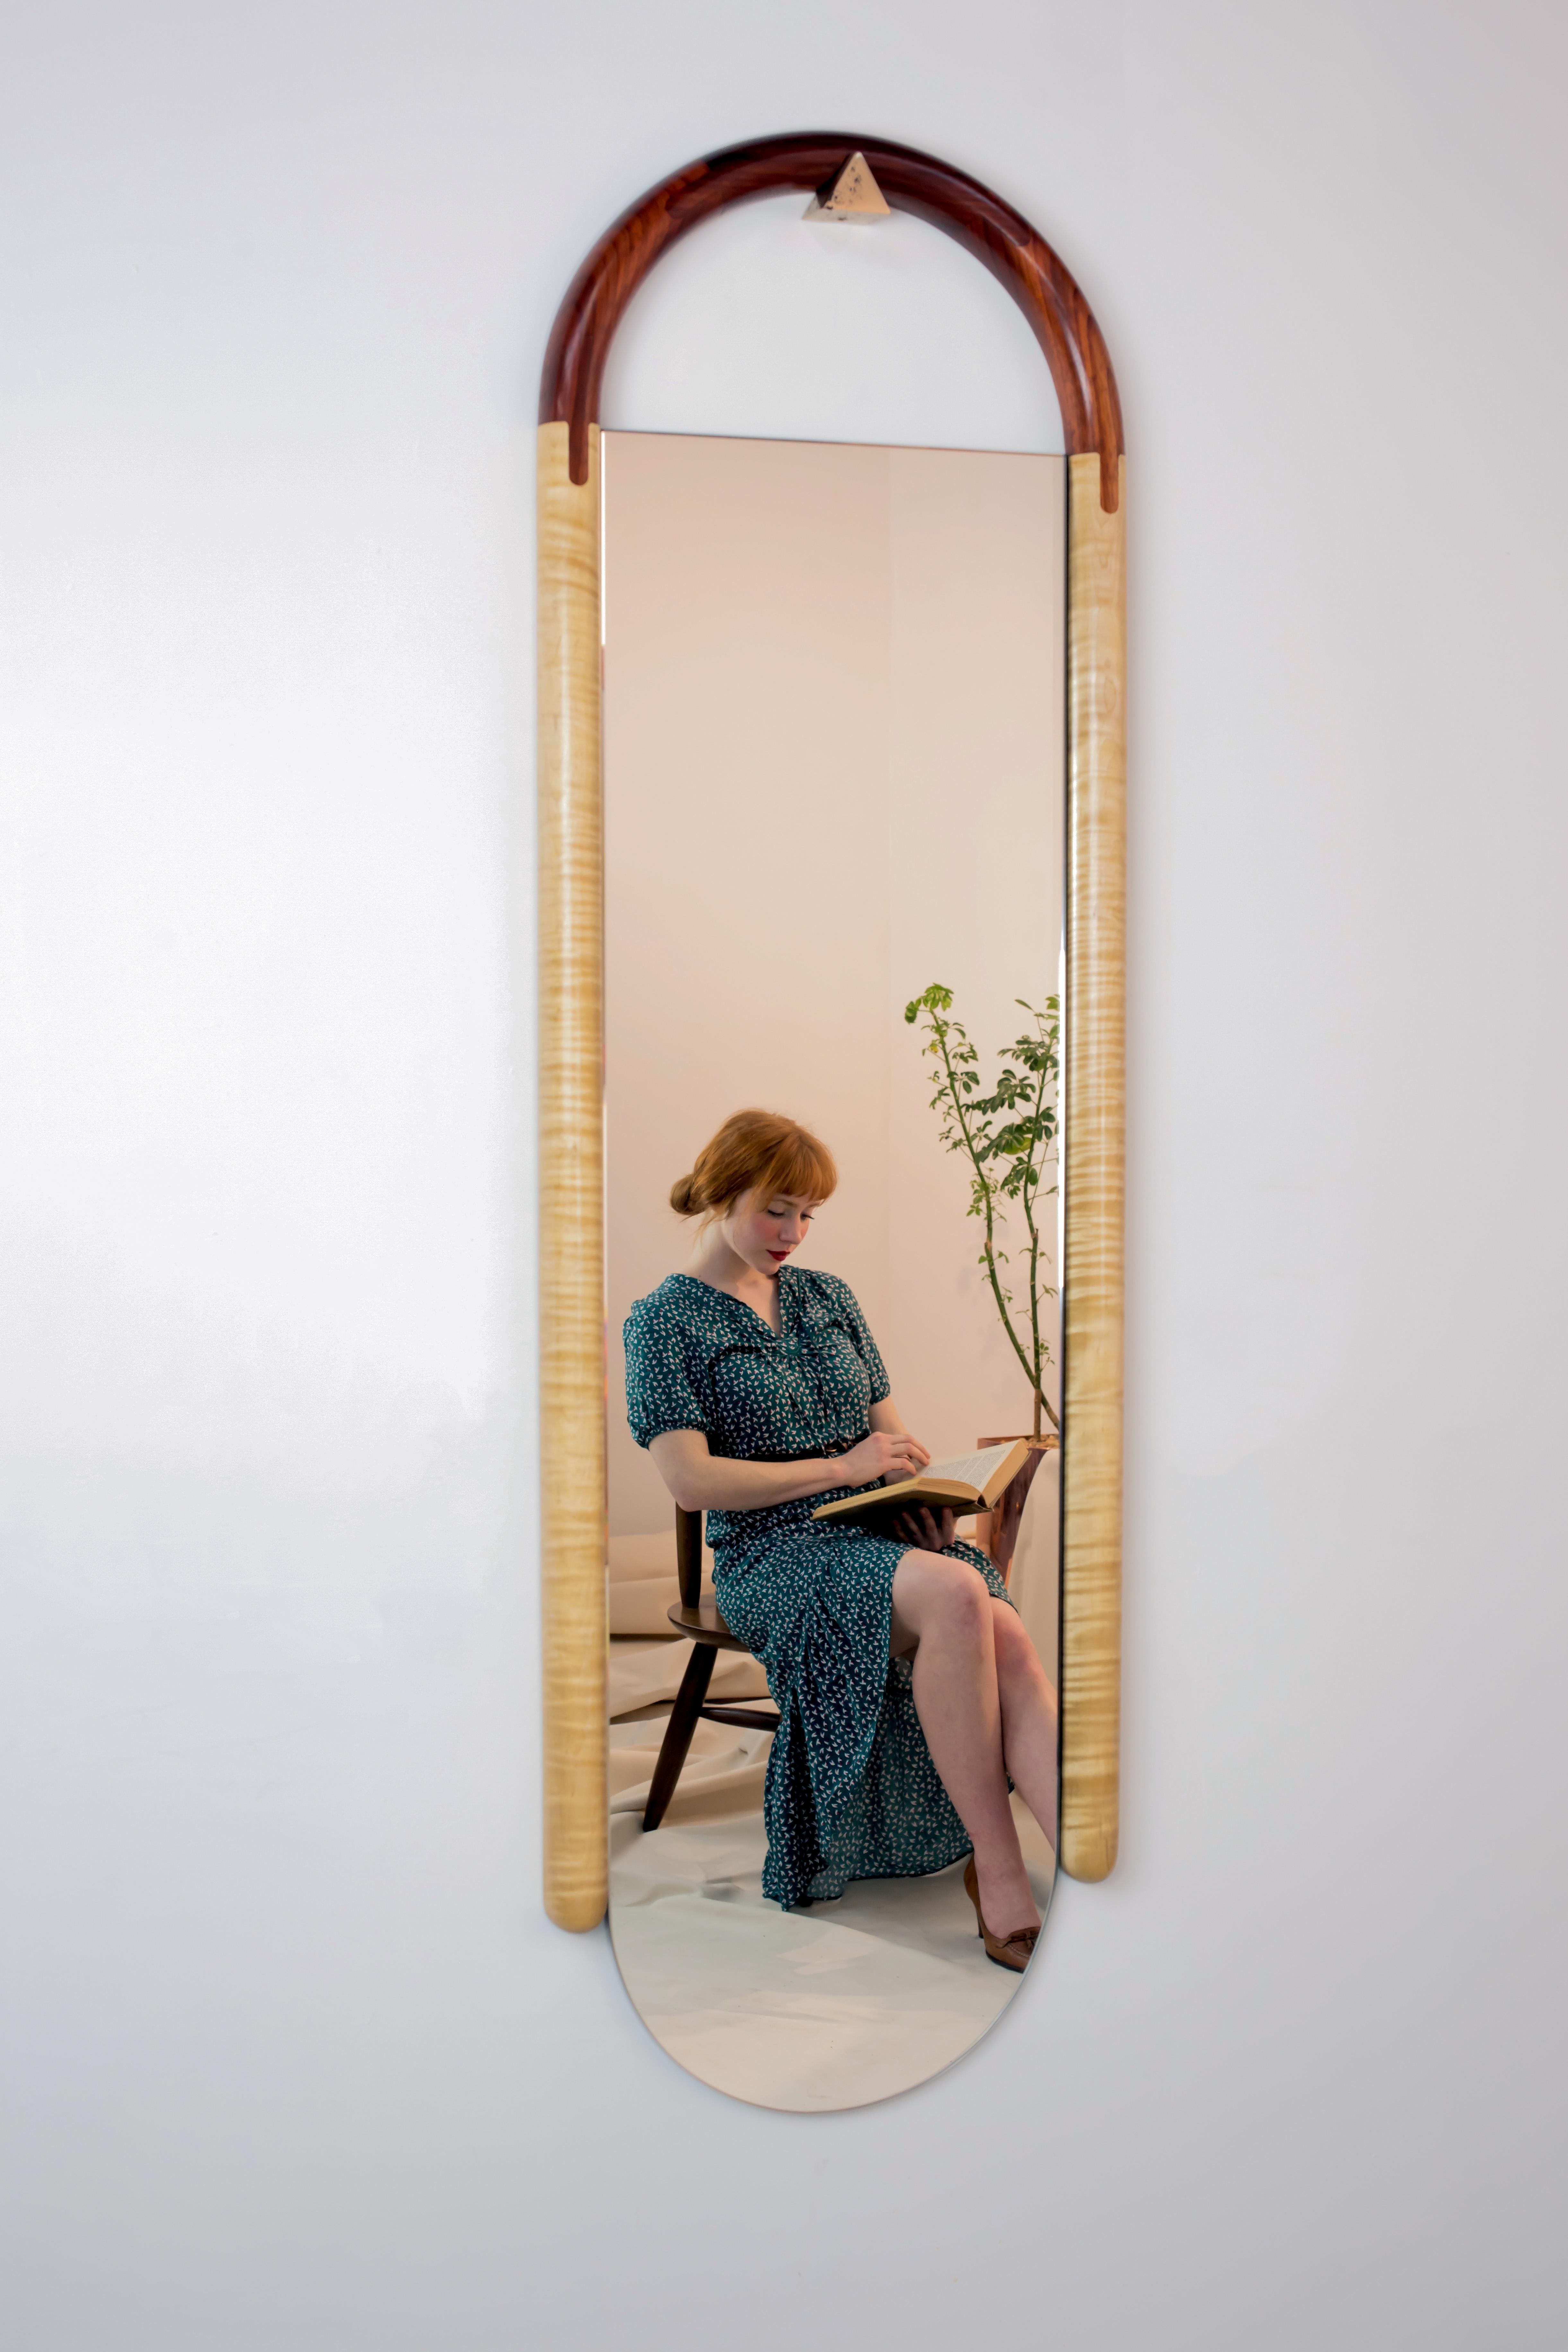 Contemporary Halo Mirror Wall Mounted Birnam Wood Studio in Figured Walnut and Curly Maple For Sale